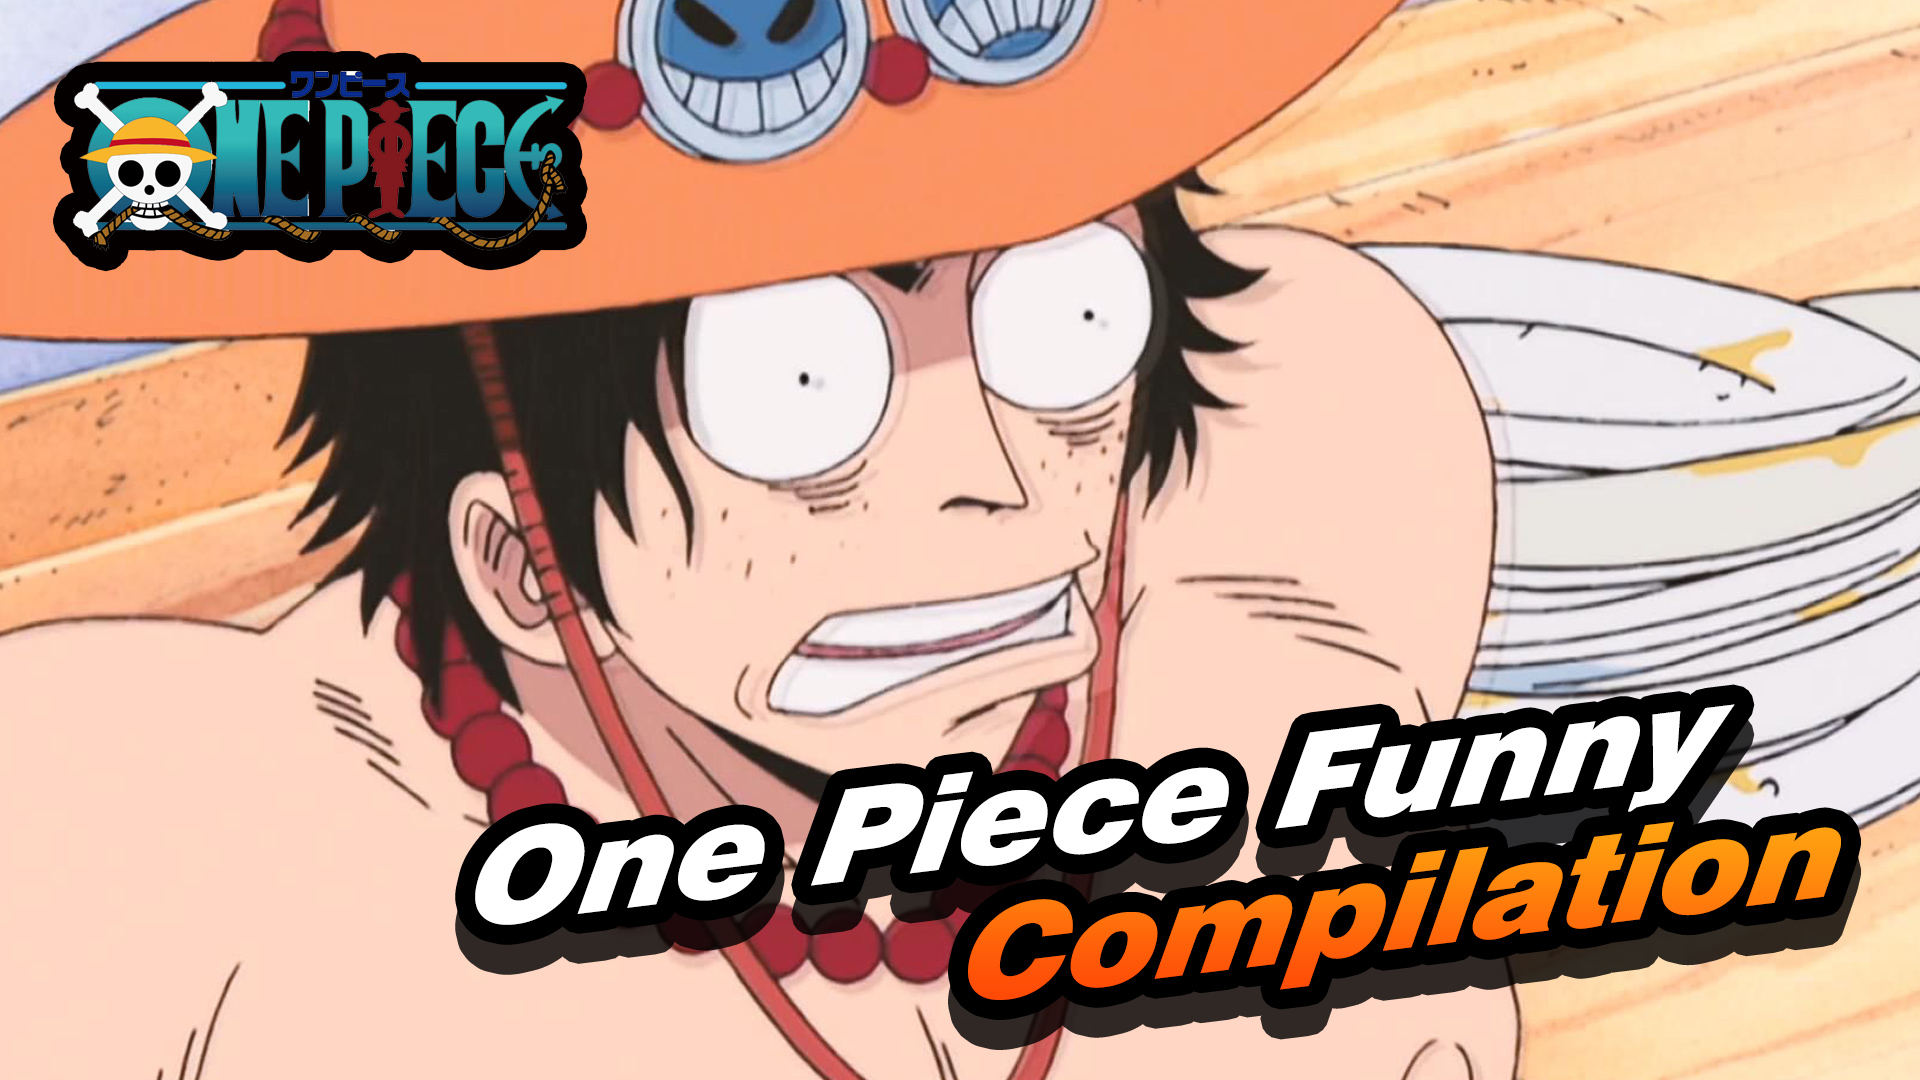 You Laugh, You Lose | One Piece Funny Compilation - Bilibili